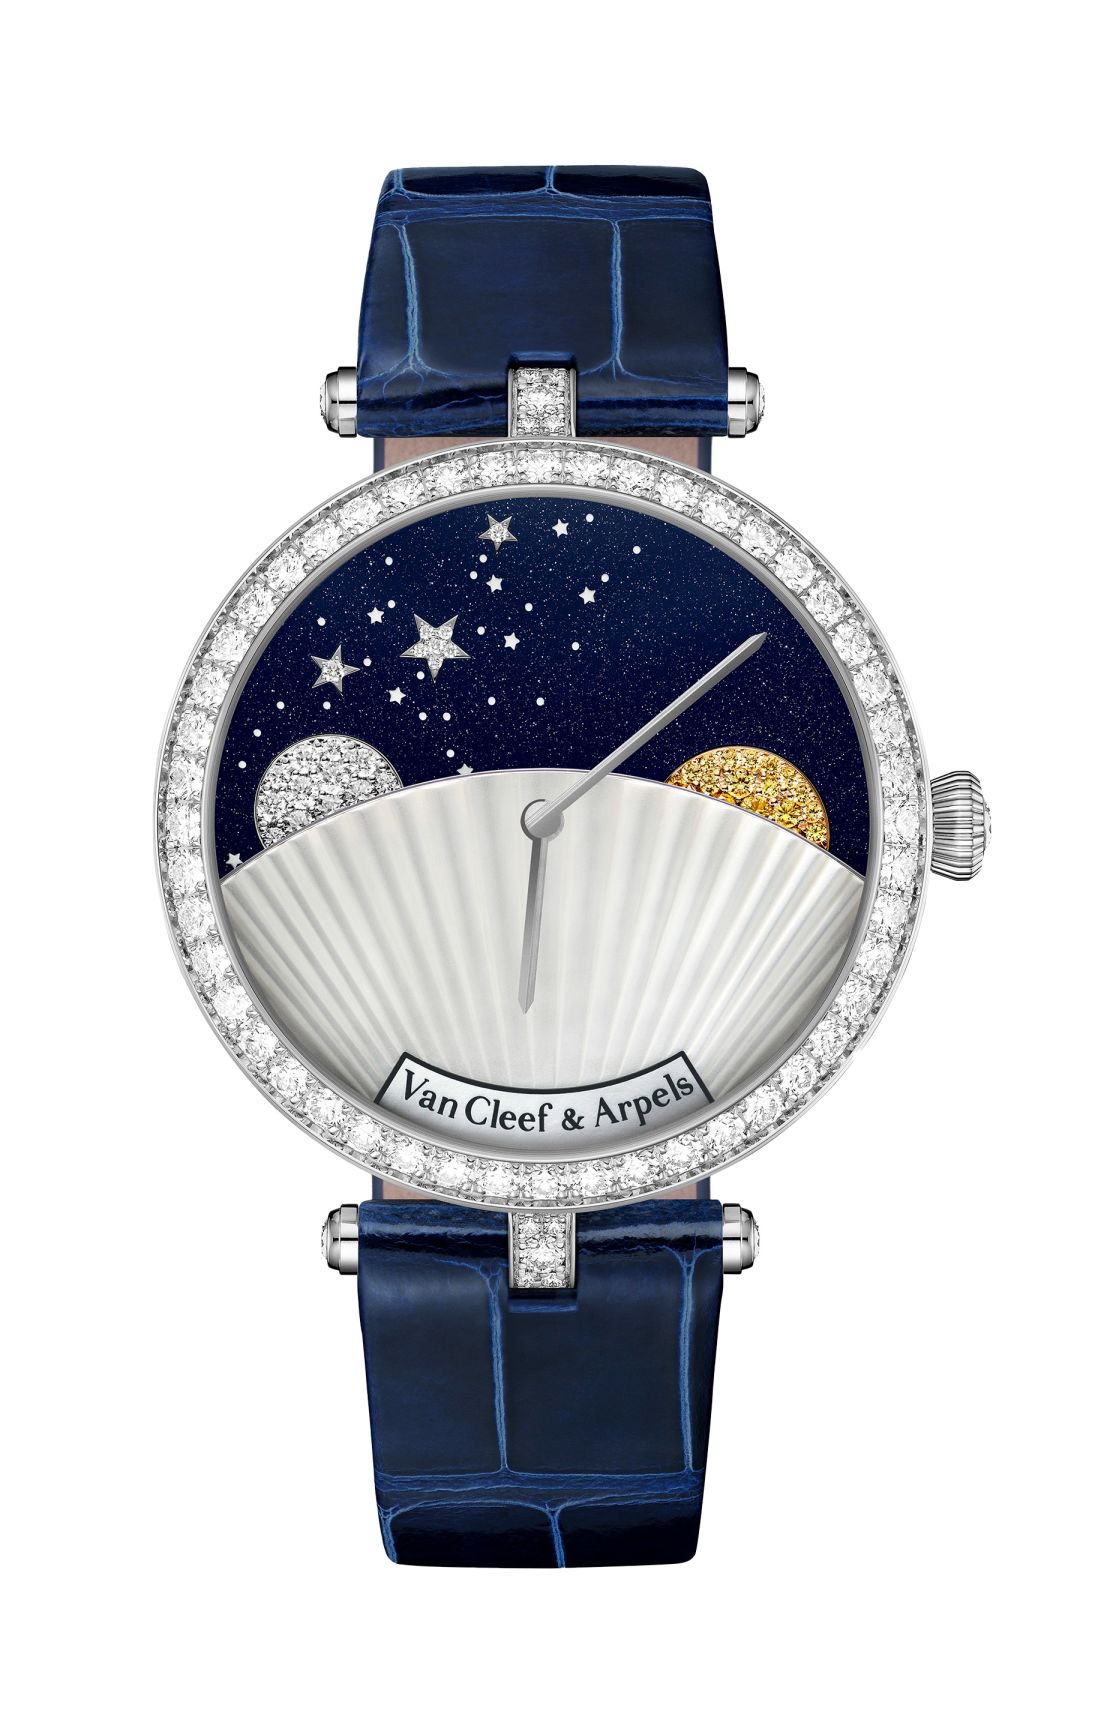 Van Cleef & Arpels Lady Jour Nuit 33mm in white gold, diamonds, aventurine glass, mother-of-pearl, POA, vancleefarpels.com. Available now.